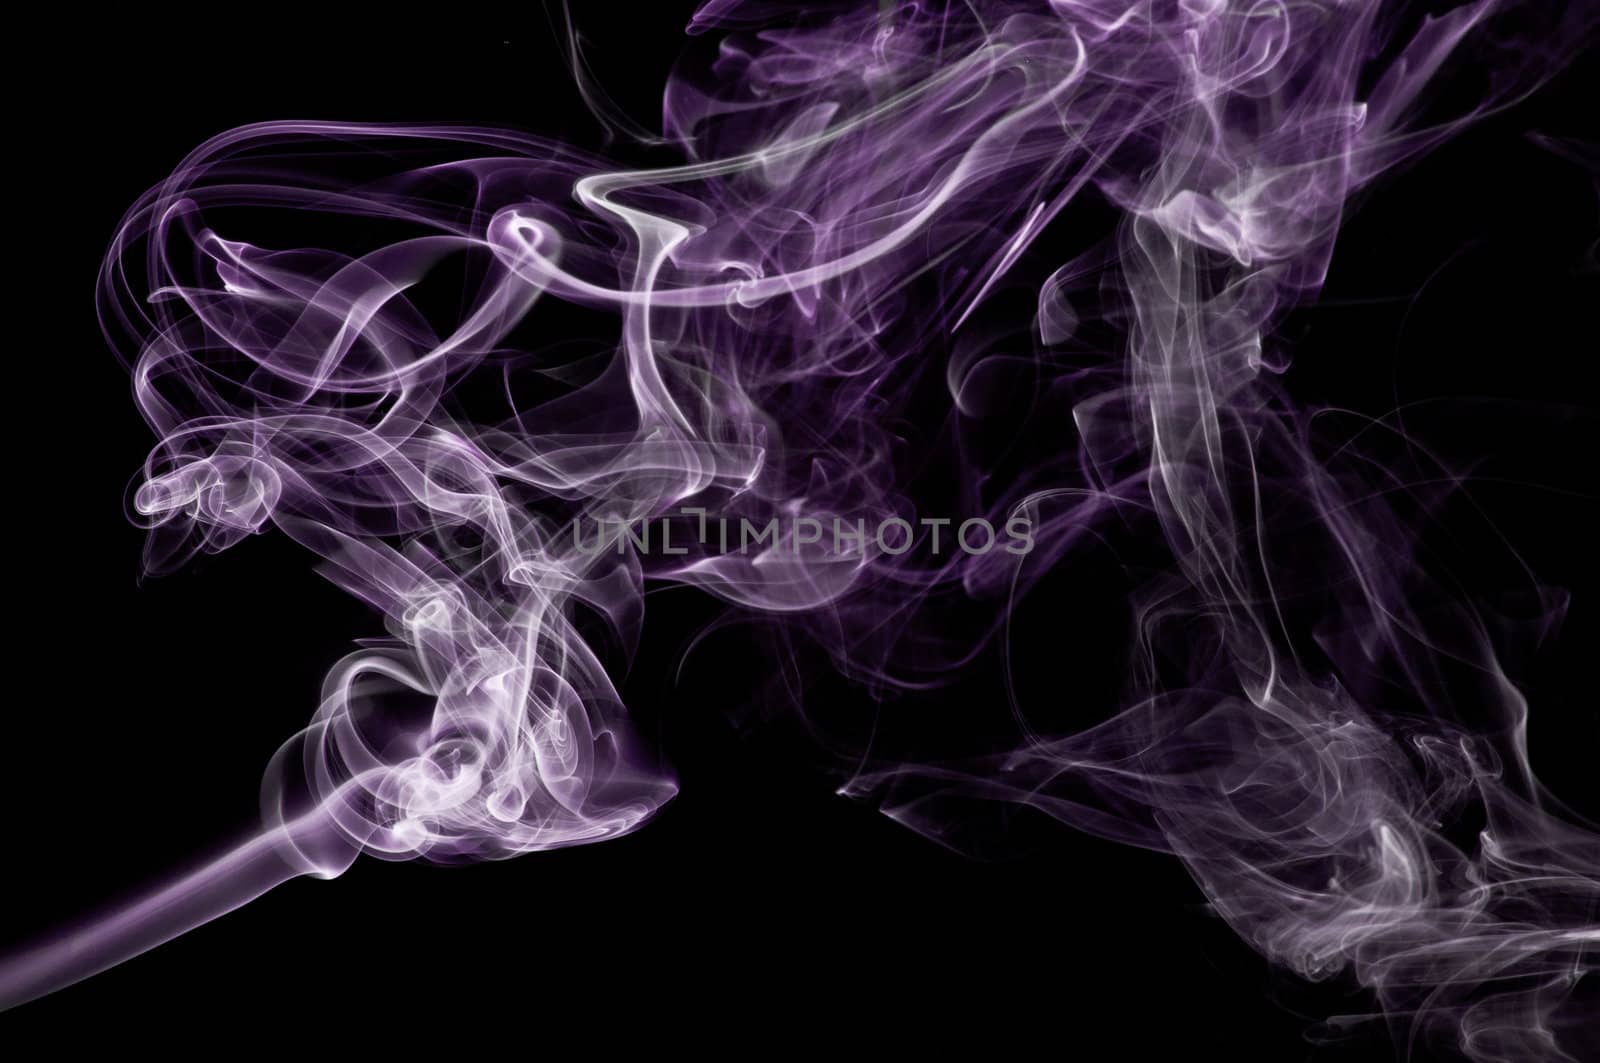 An abstract image of purple smoke set against a black background.